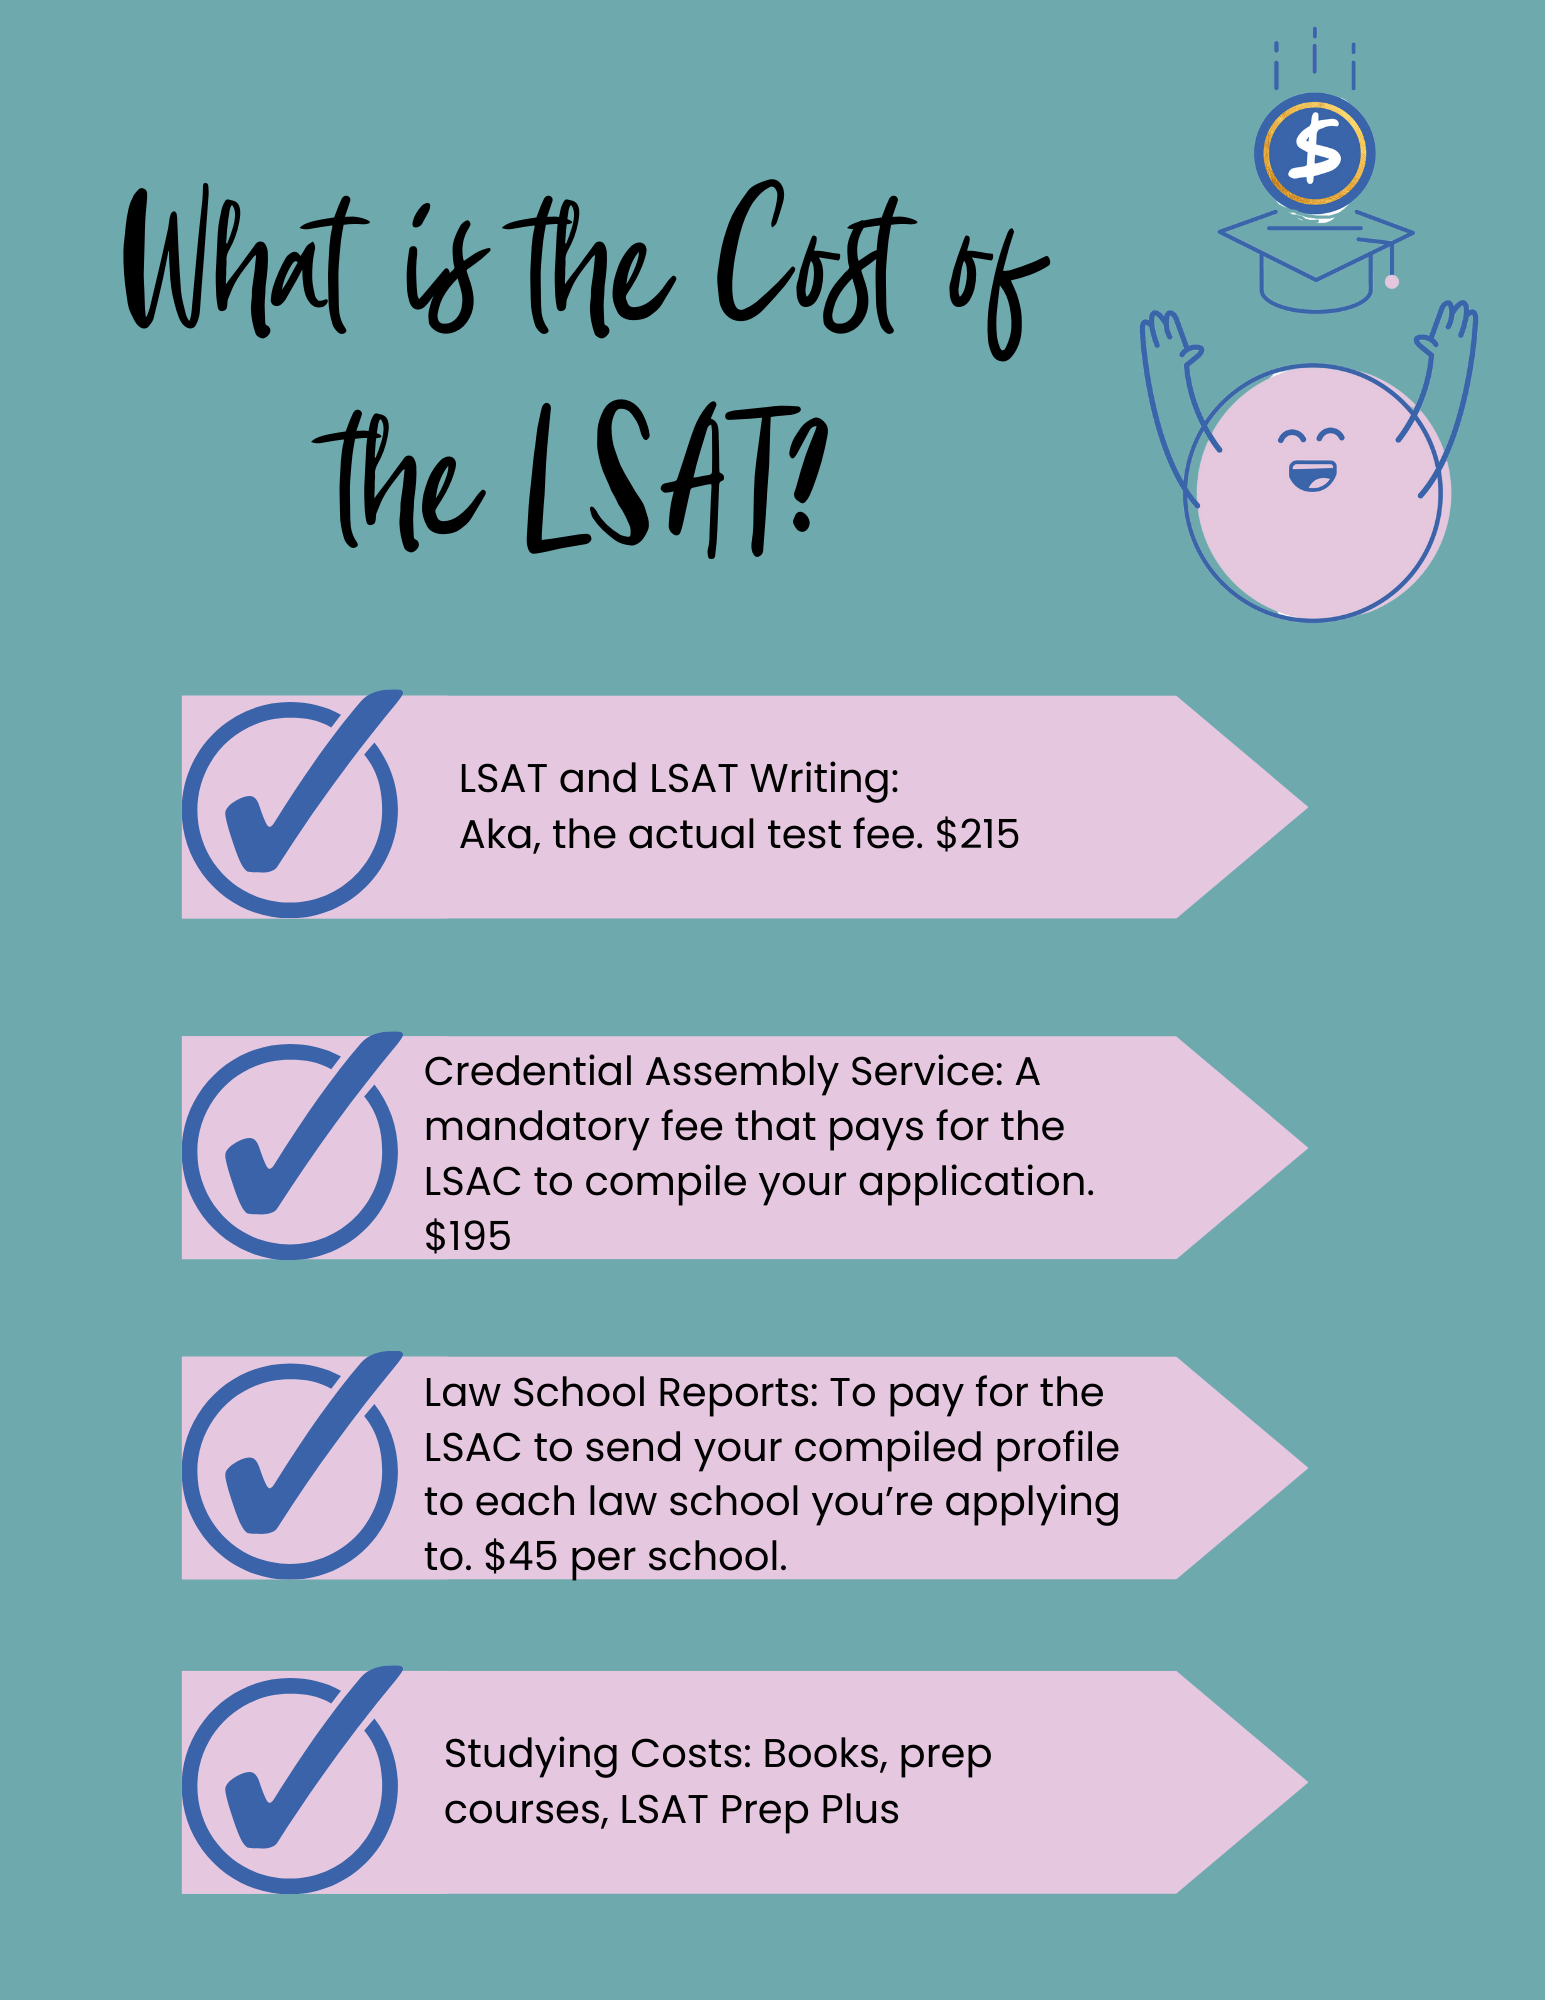 how-much-is-it-to-take-the-lsat-how-to-save-on-the-cost-of-the-lsat-goldenlsat